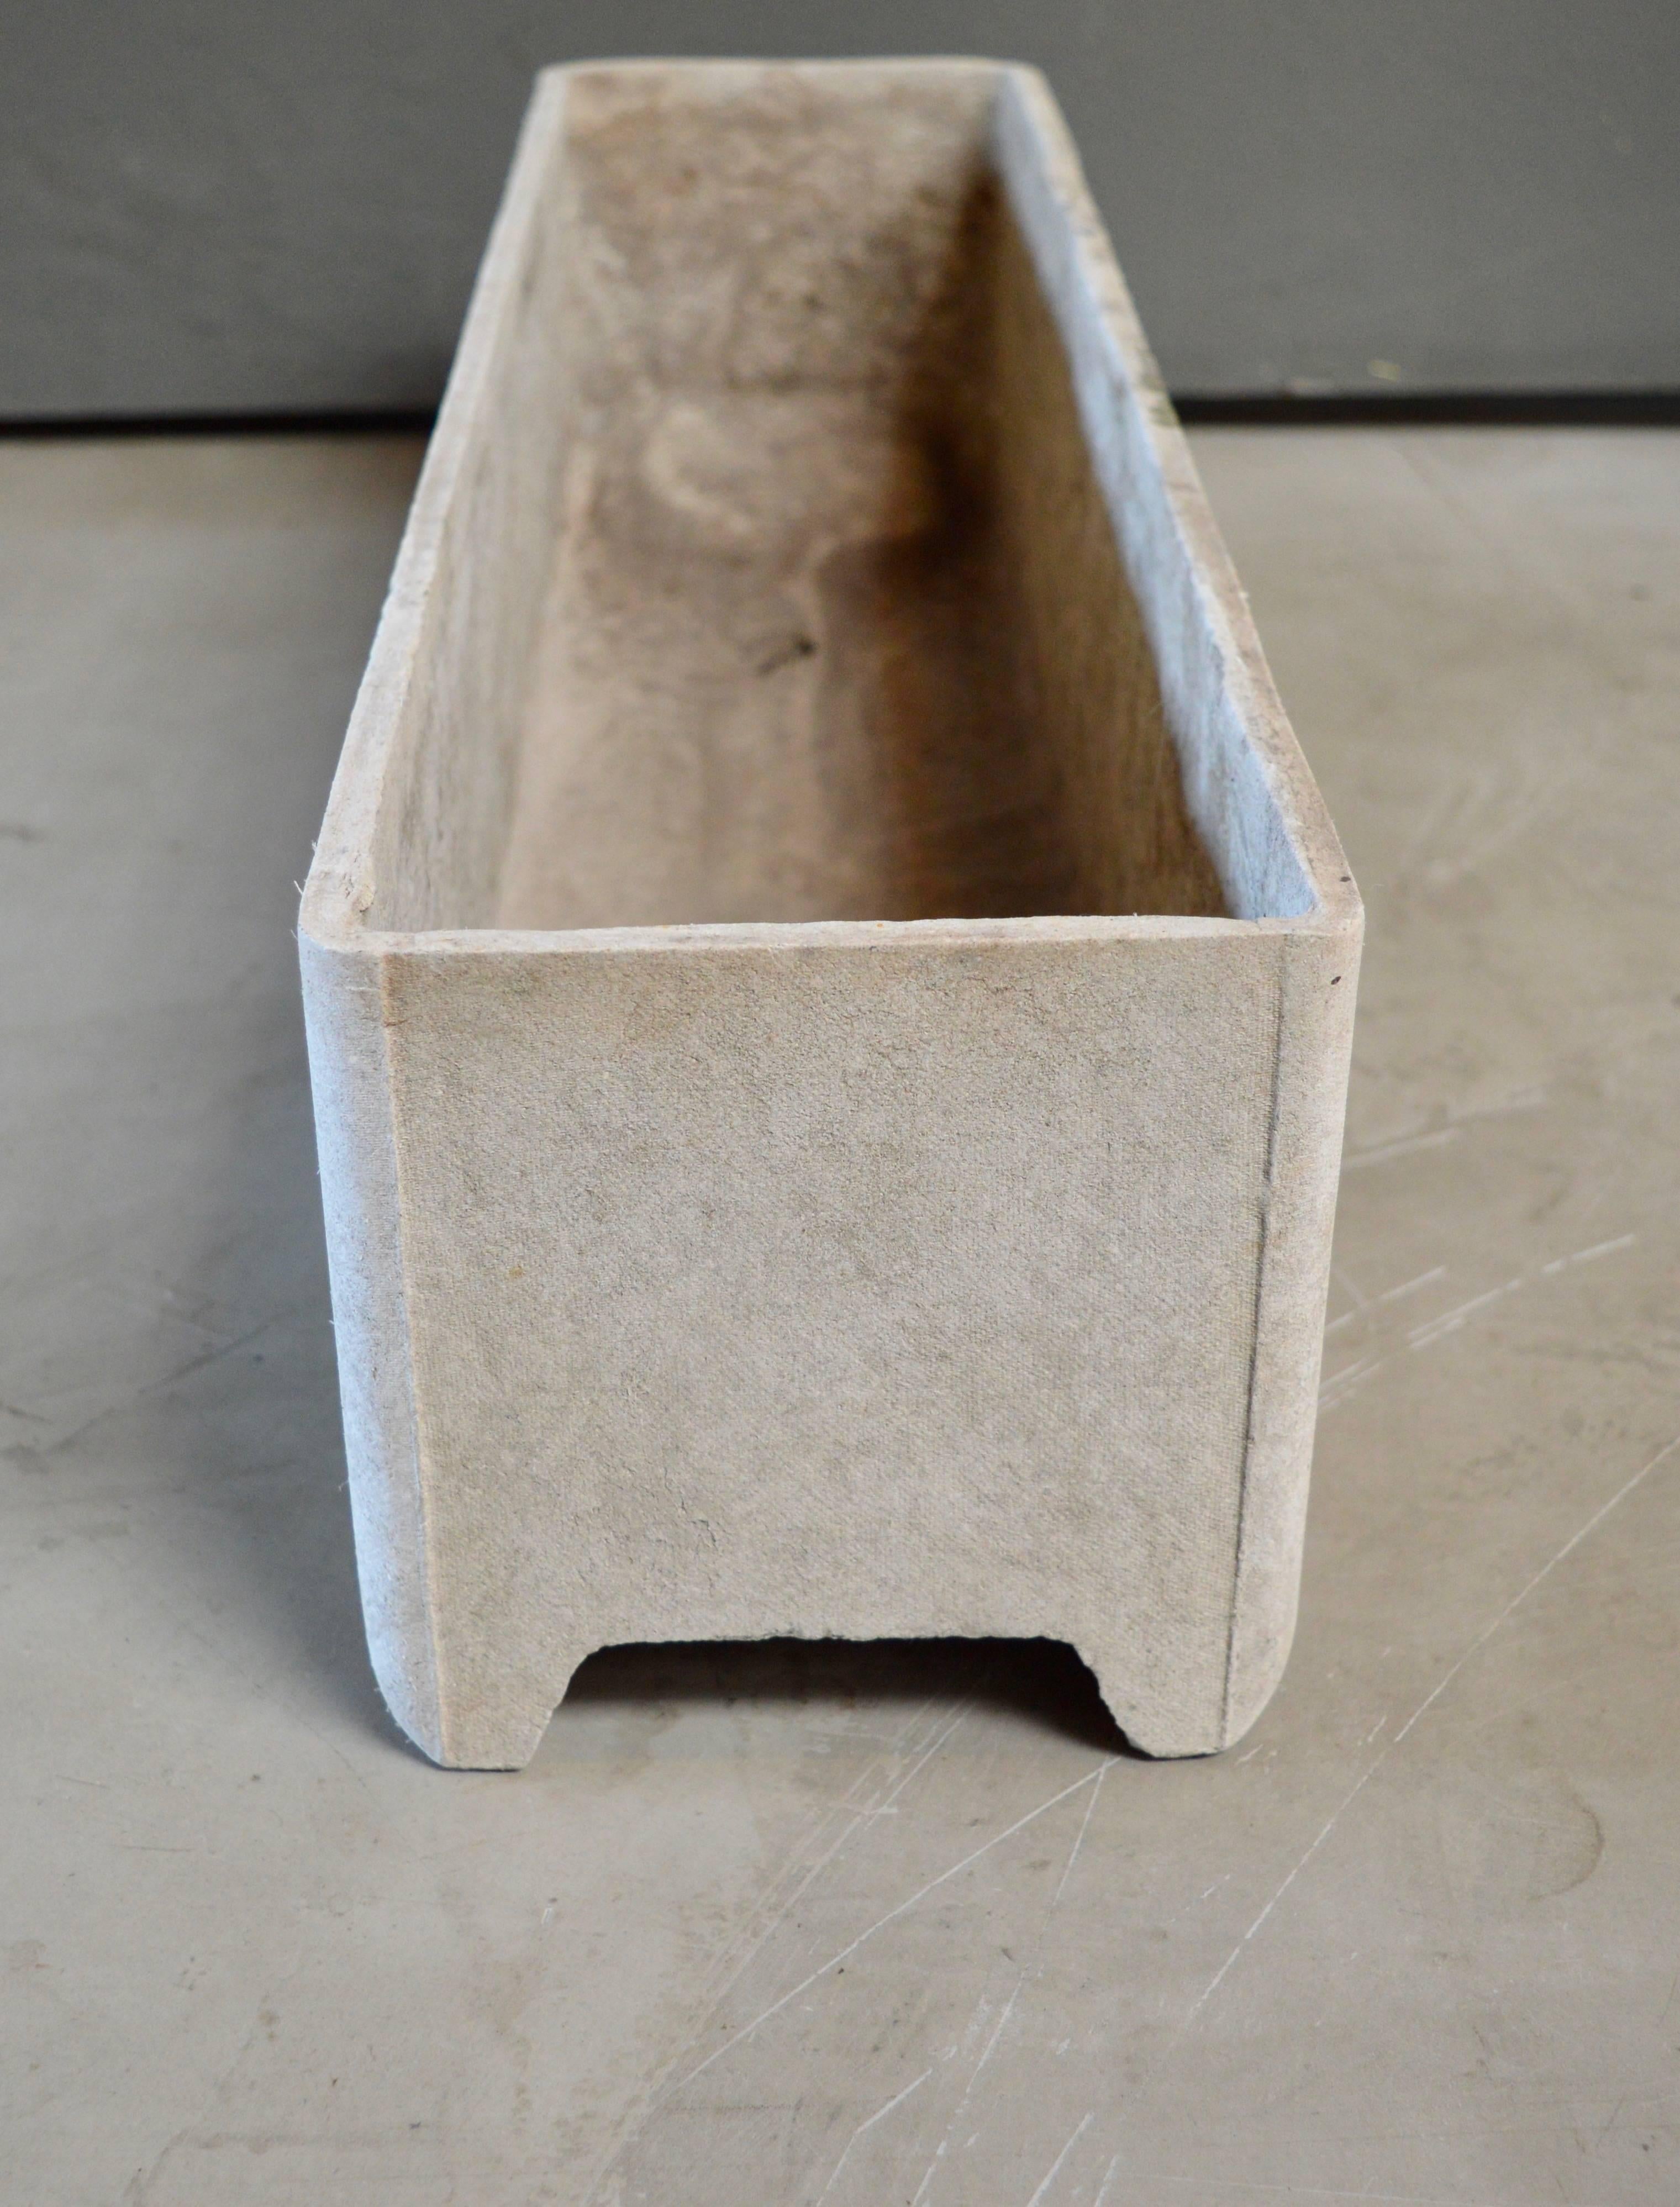 Classic cement planter by Willy Guhl for Eternit. Rectangular planter in excellent vintage condition. 

Slightly larger similar planter available in separate listing.